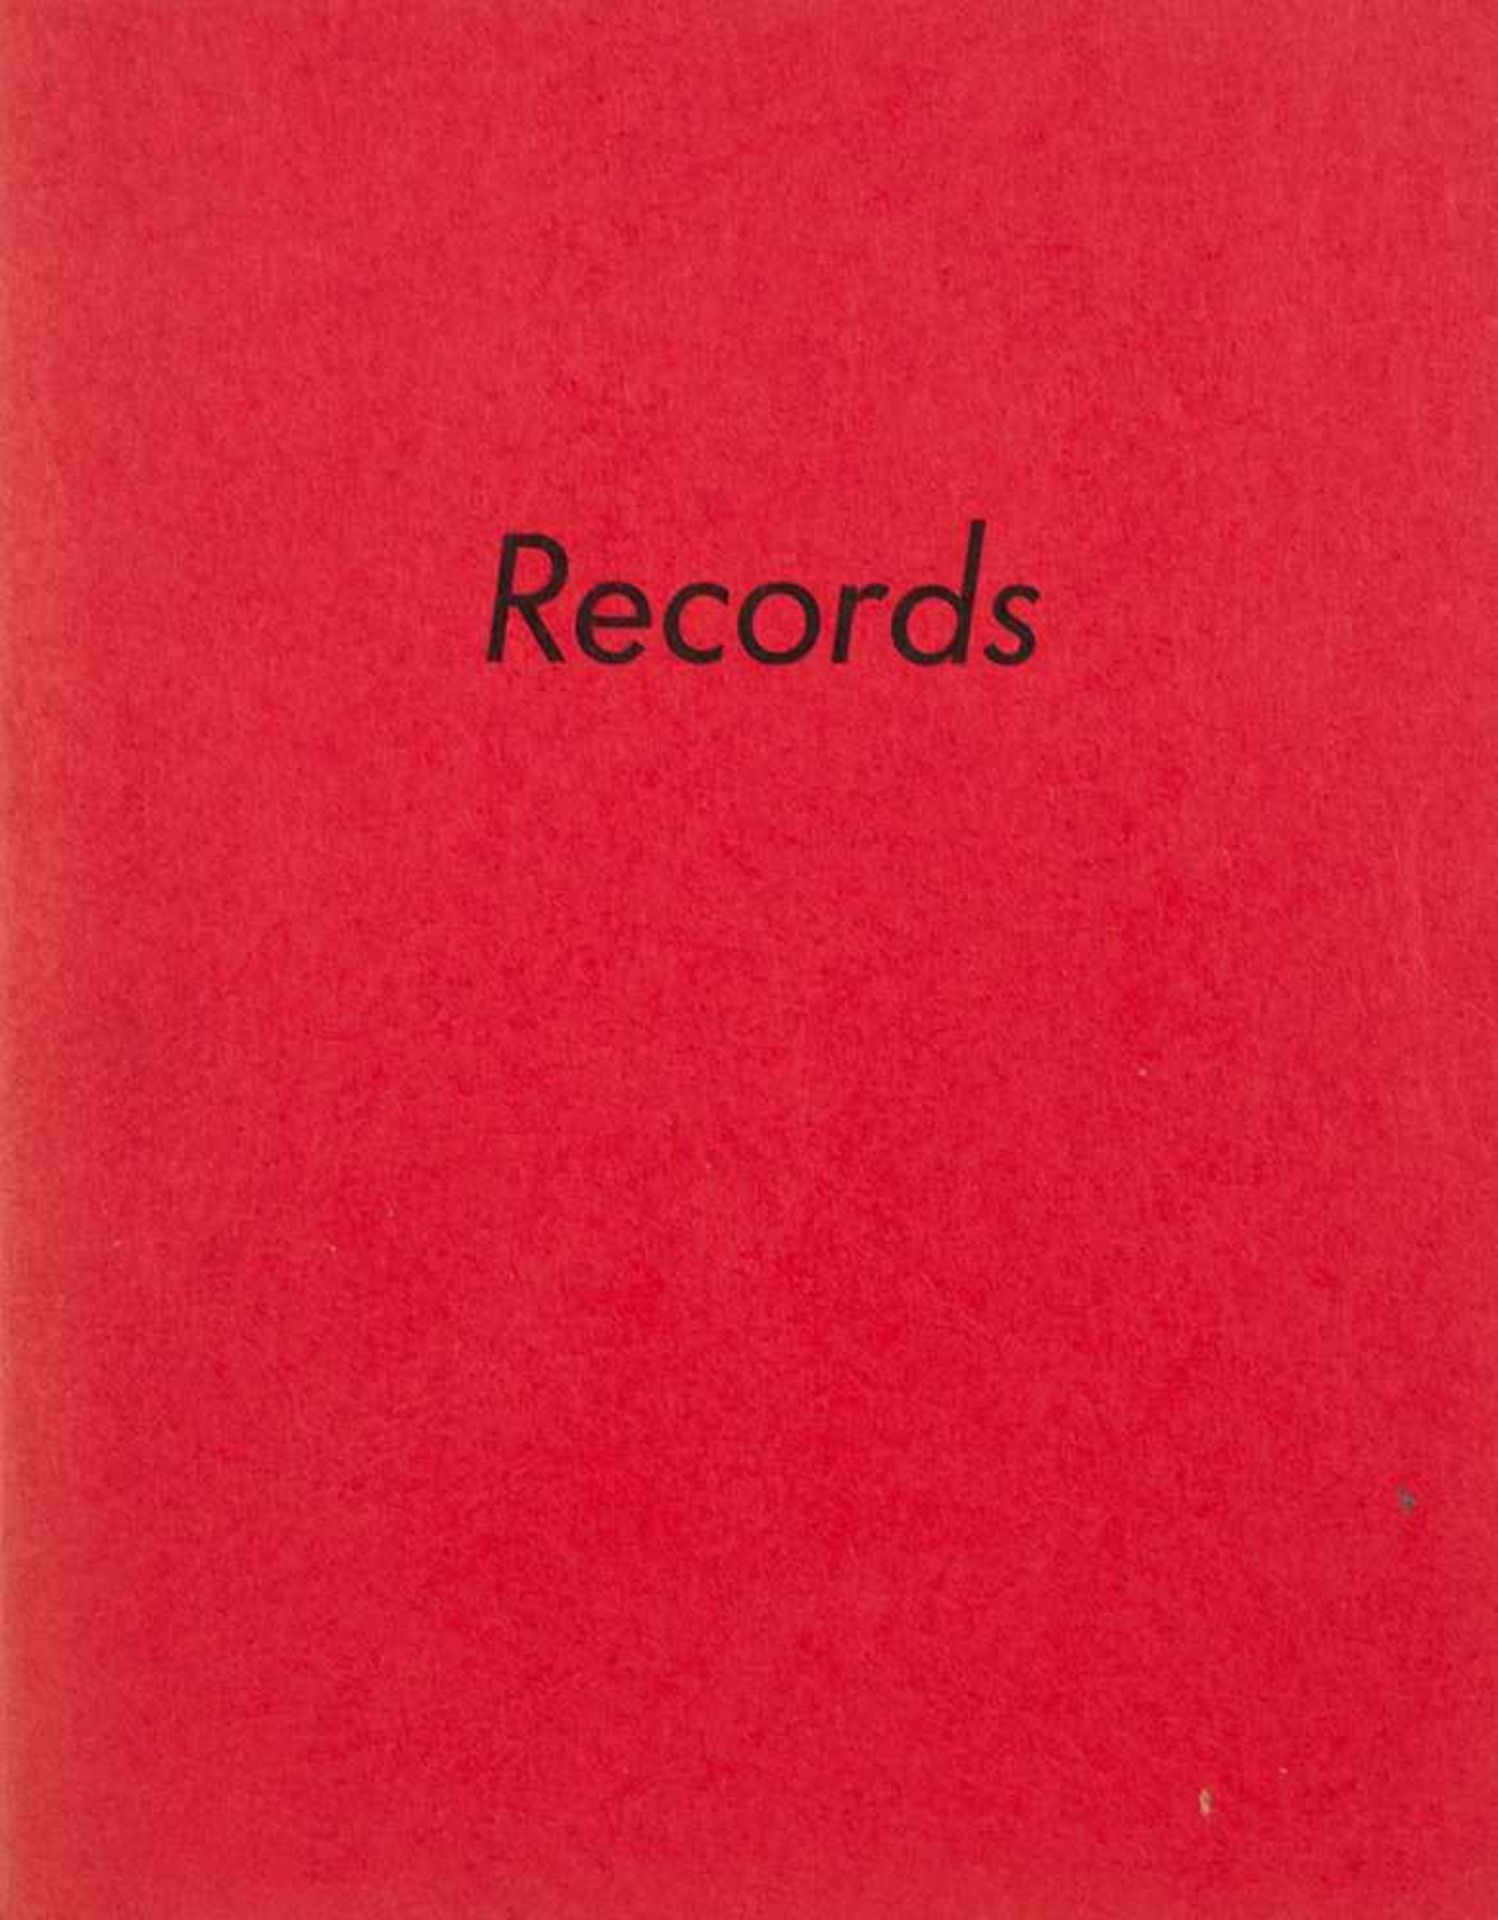 Fotografie. – Edward Ruscha.Records. Hollywood, Heavy Industrie Publications, 1971. 72 S.,